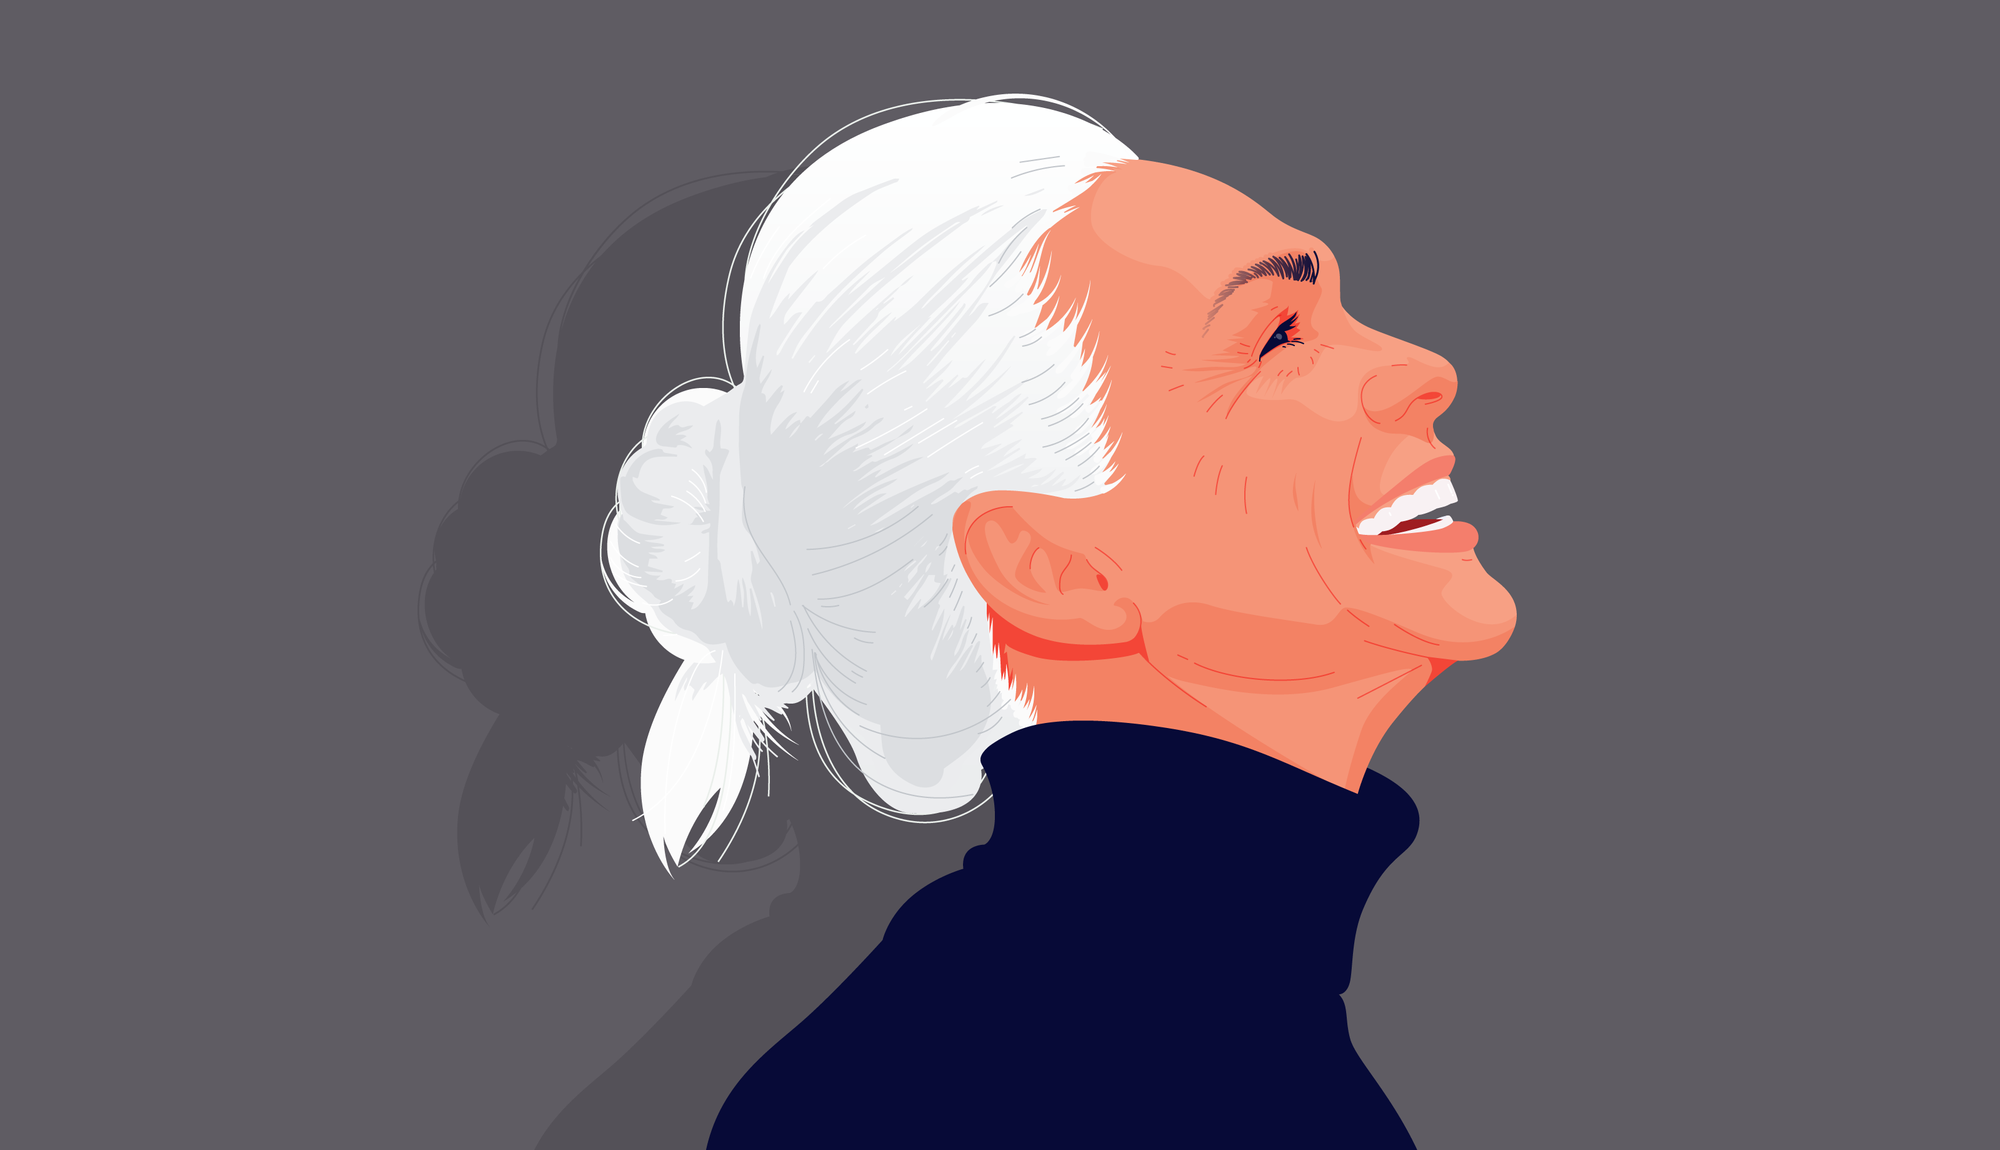 Grey Hair: Here's Why Some People Go Grey Before Others